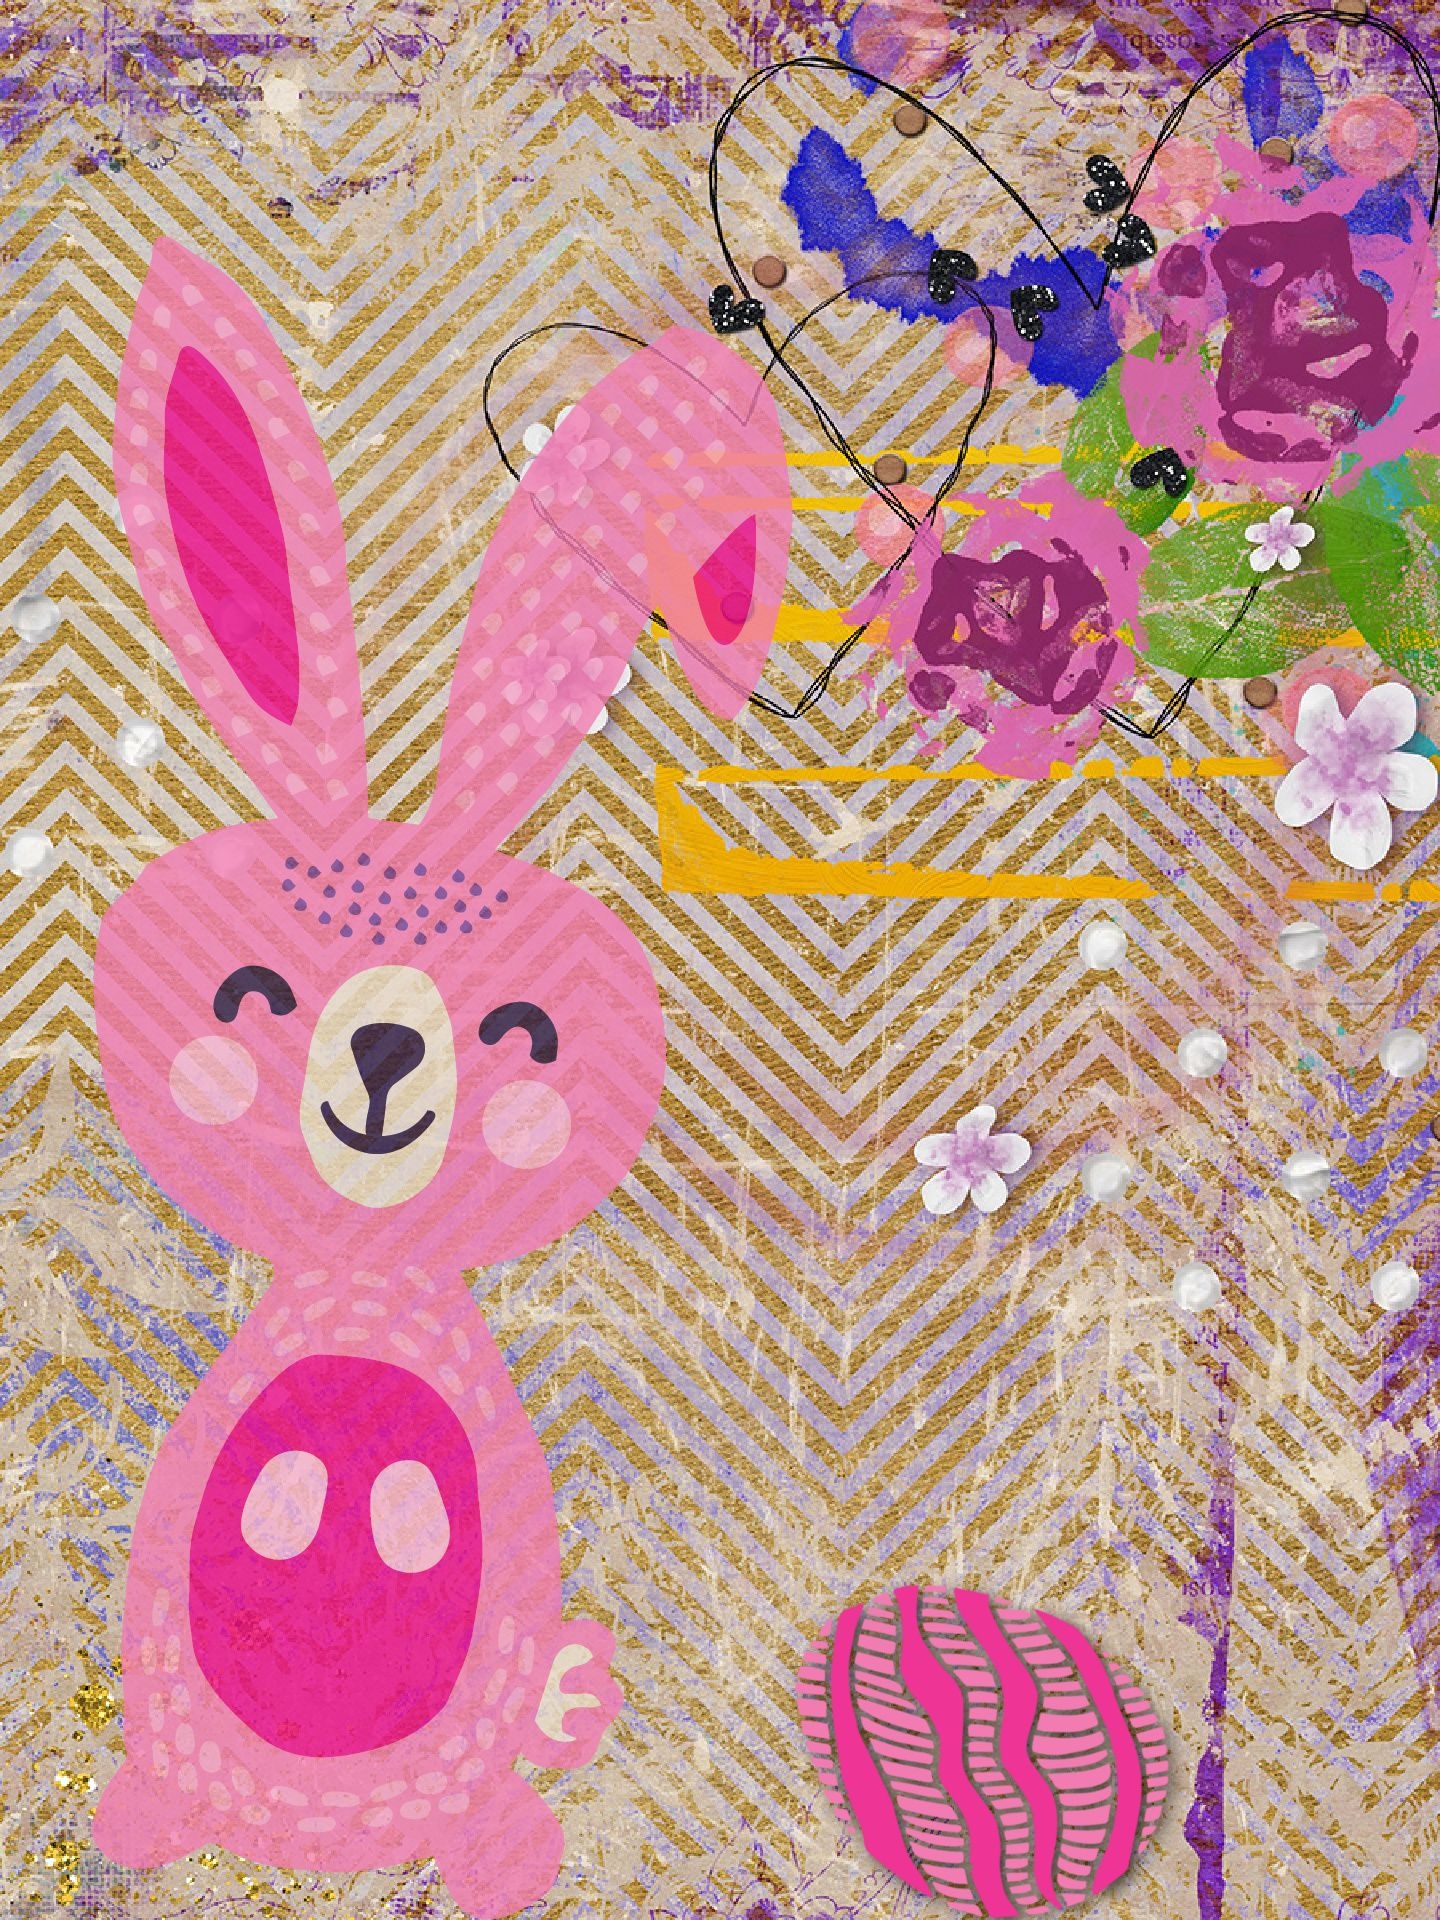 contemporary design with pink bunny rabbit